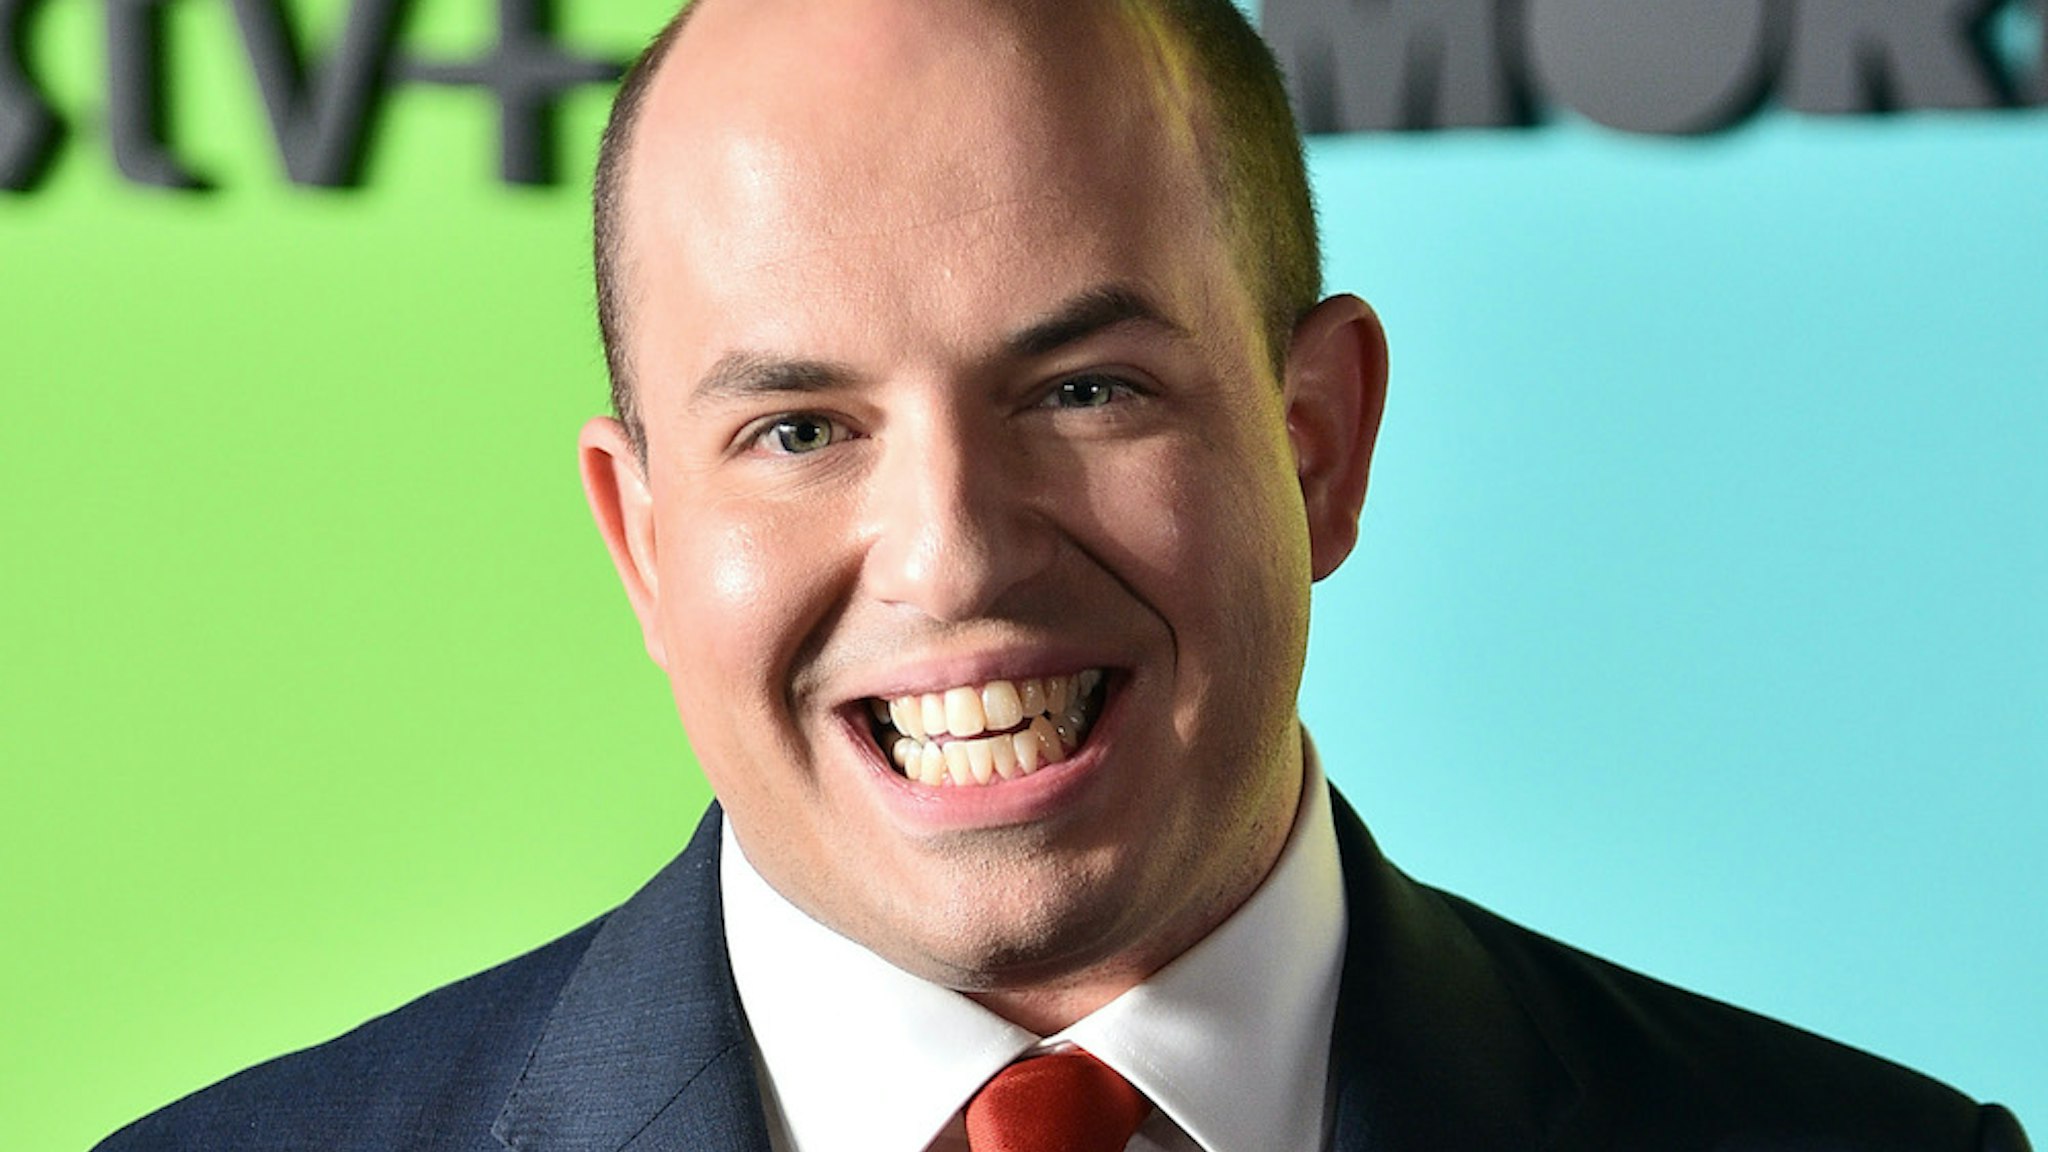 Brian Stelter attends the Apple TV+'s "The Morning Show" World Premiere at David Geffen Hall on October 28, 2019 in New York City. (Photo by Theo Wargo/Getty Images)